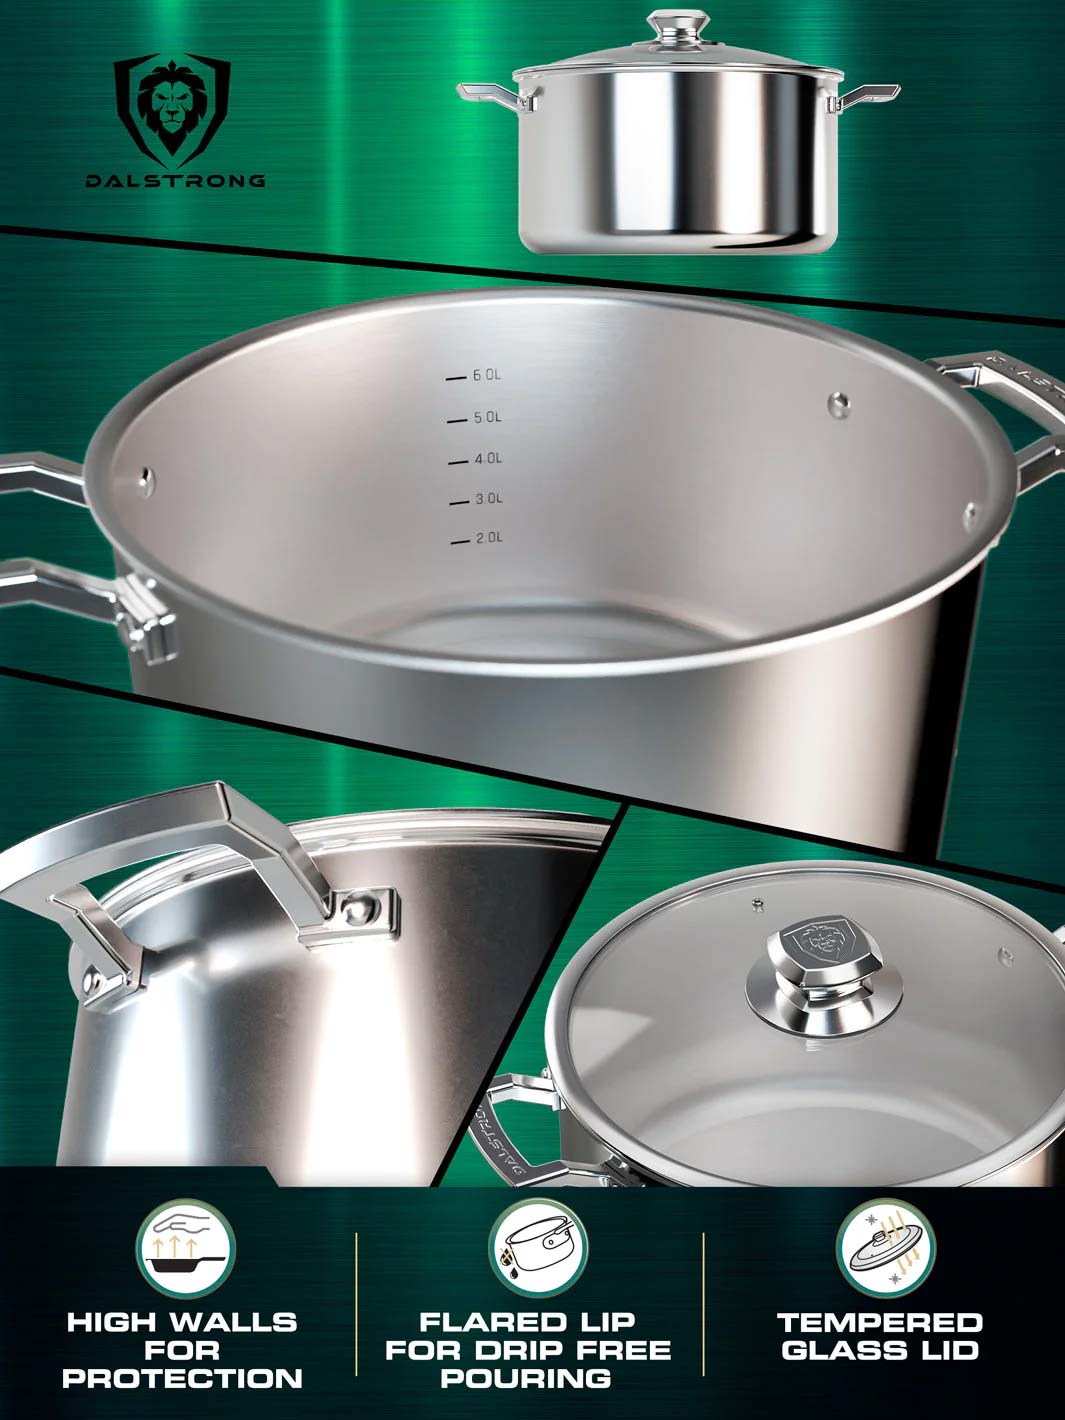 Dalstrong oberon series 8 quart stock pot silver featuring it's high walls and tempered glass lid.